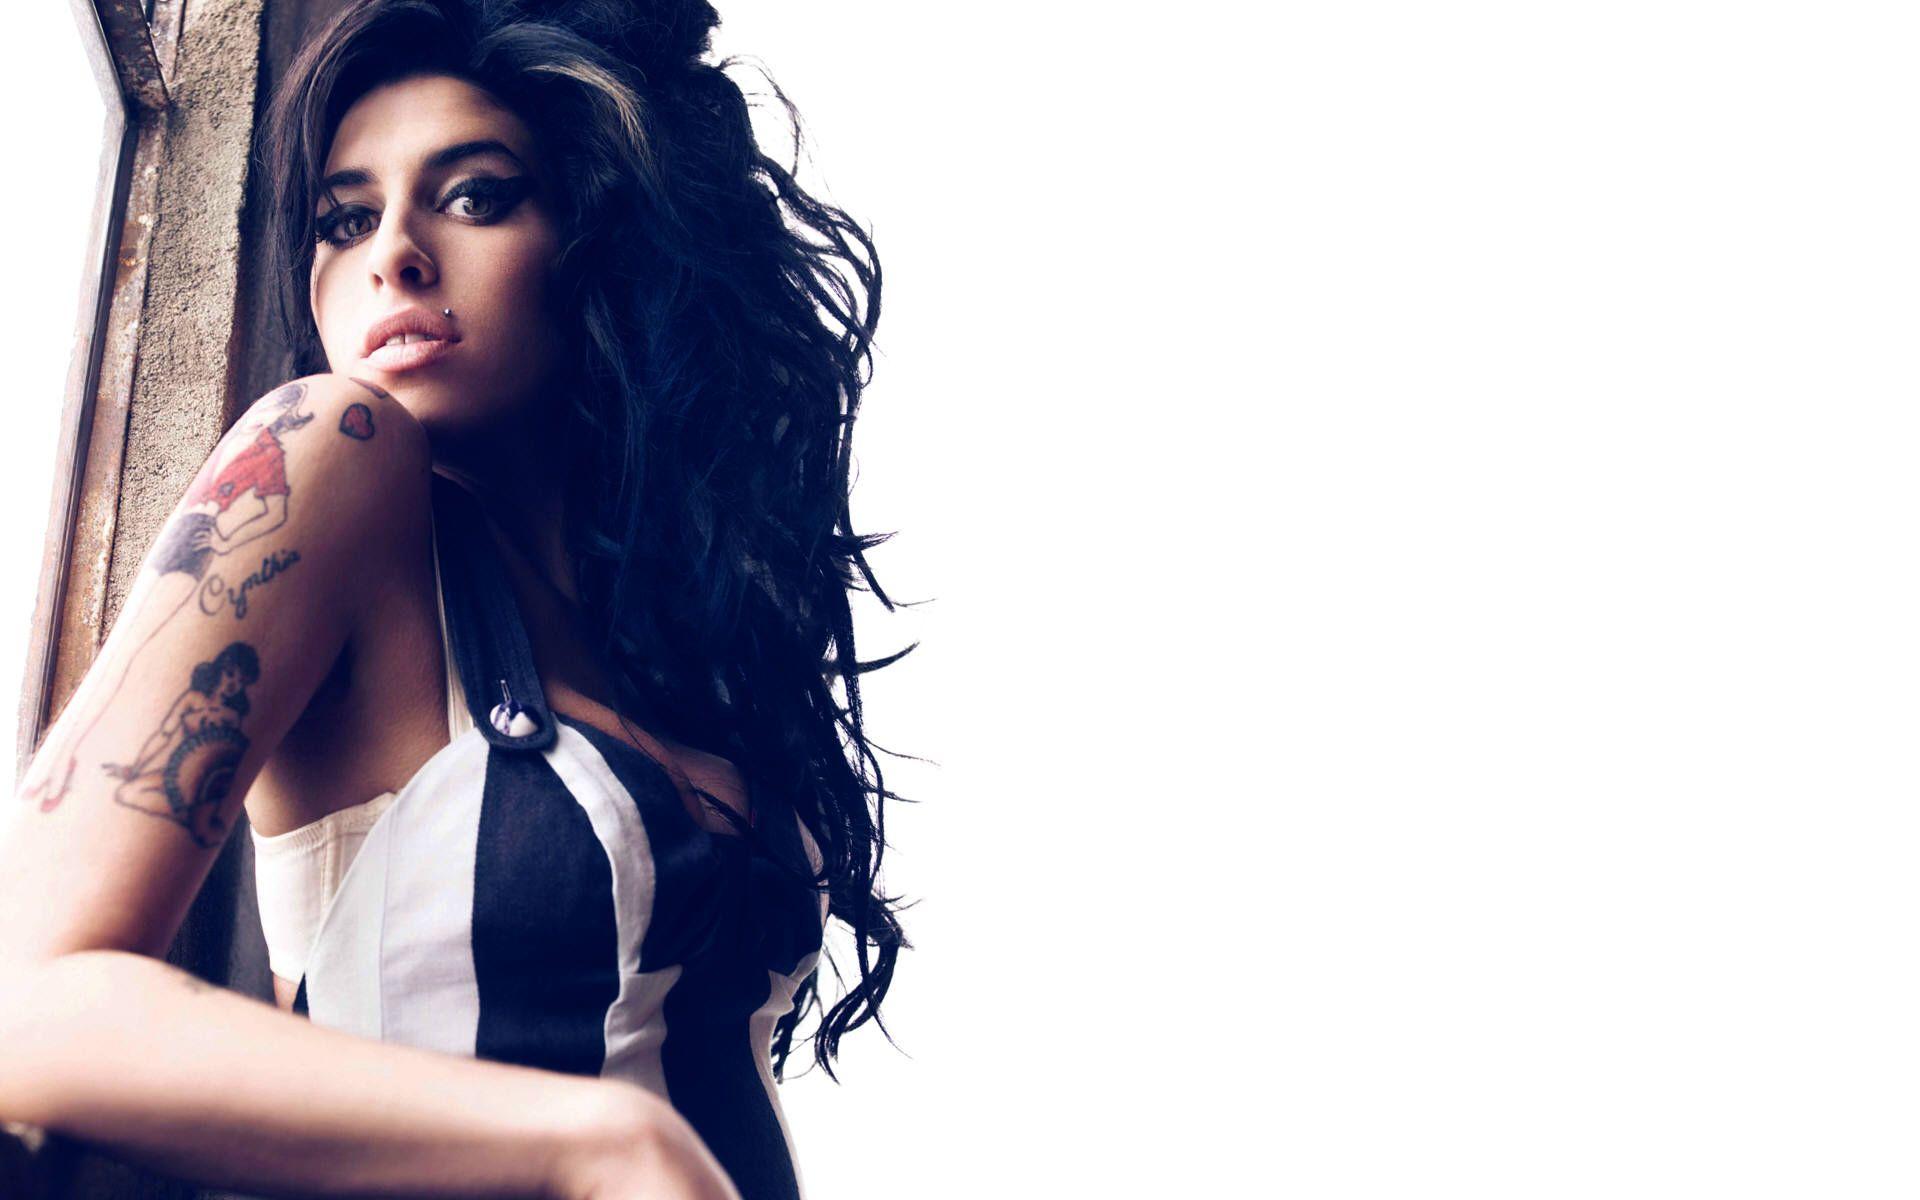 Amy Winehouse Wallpaper High Quality